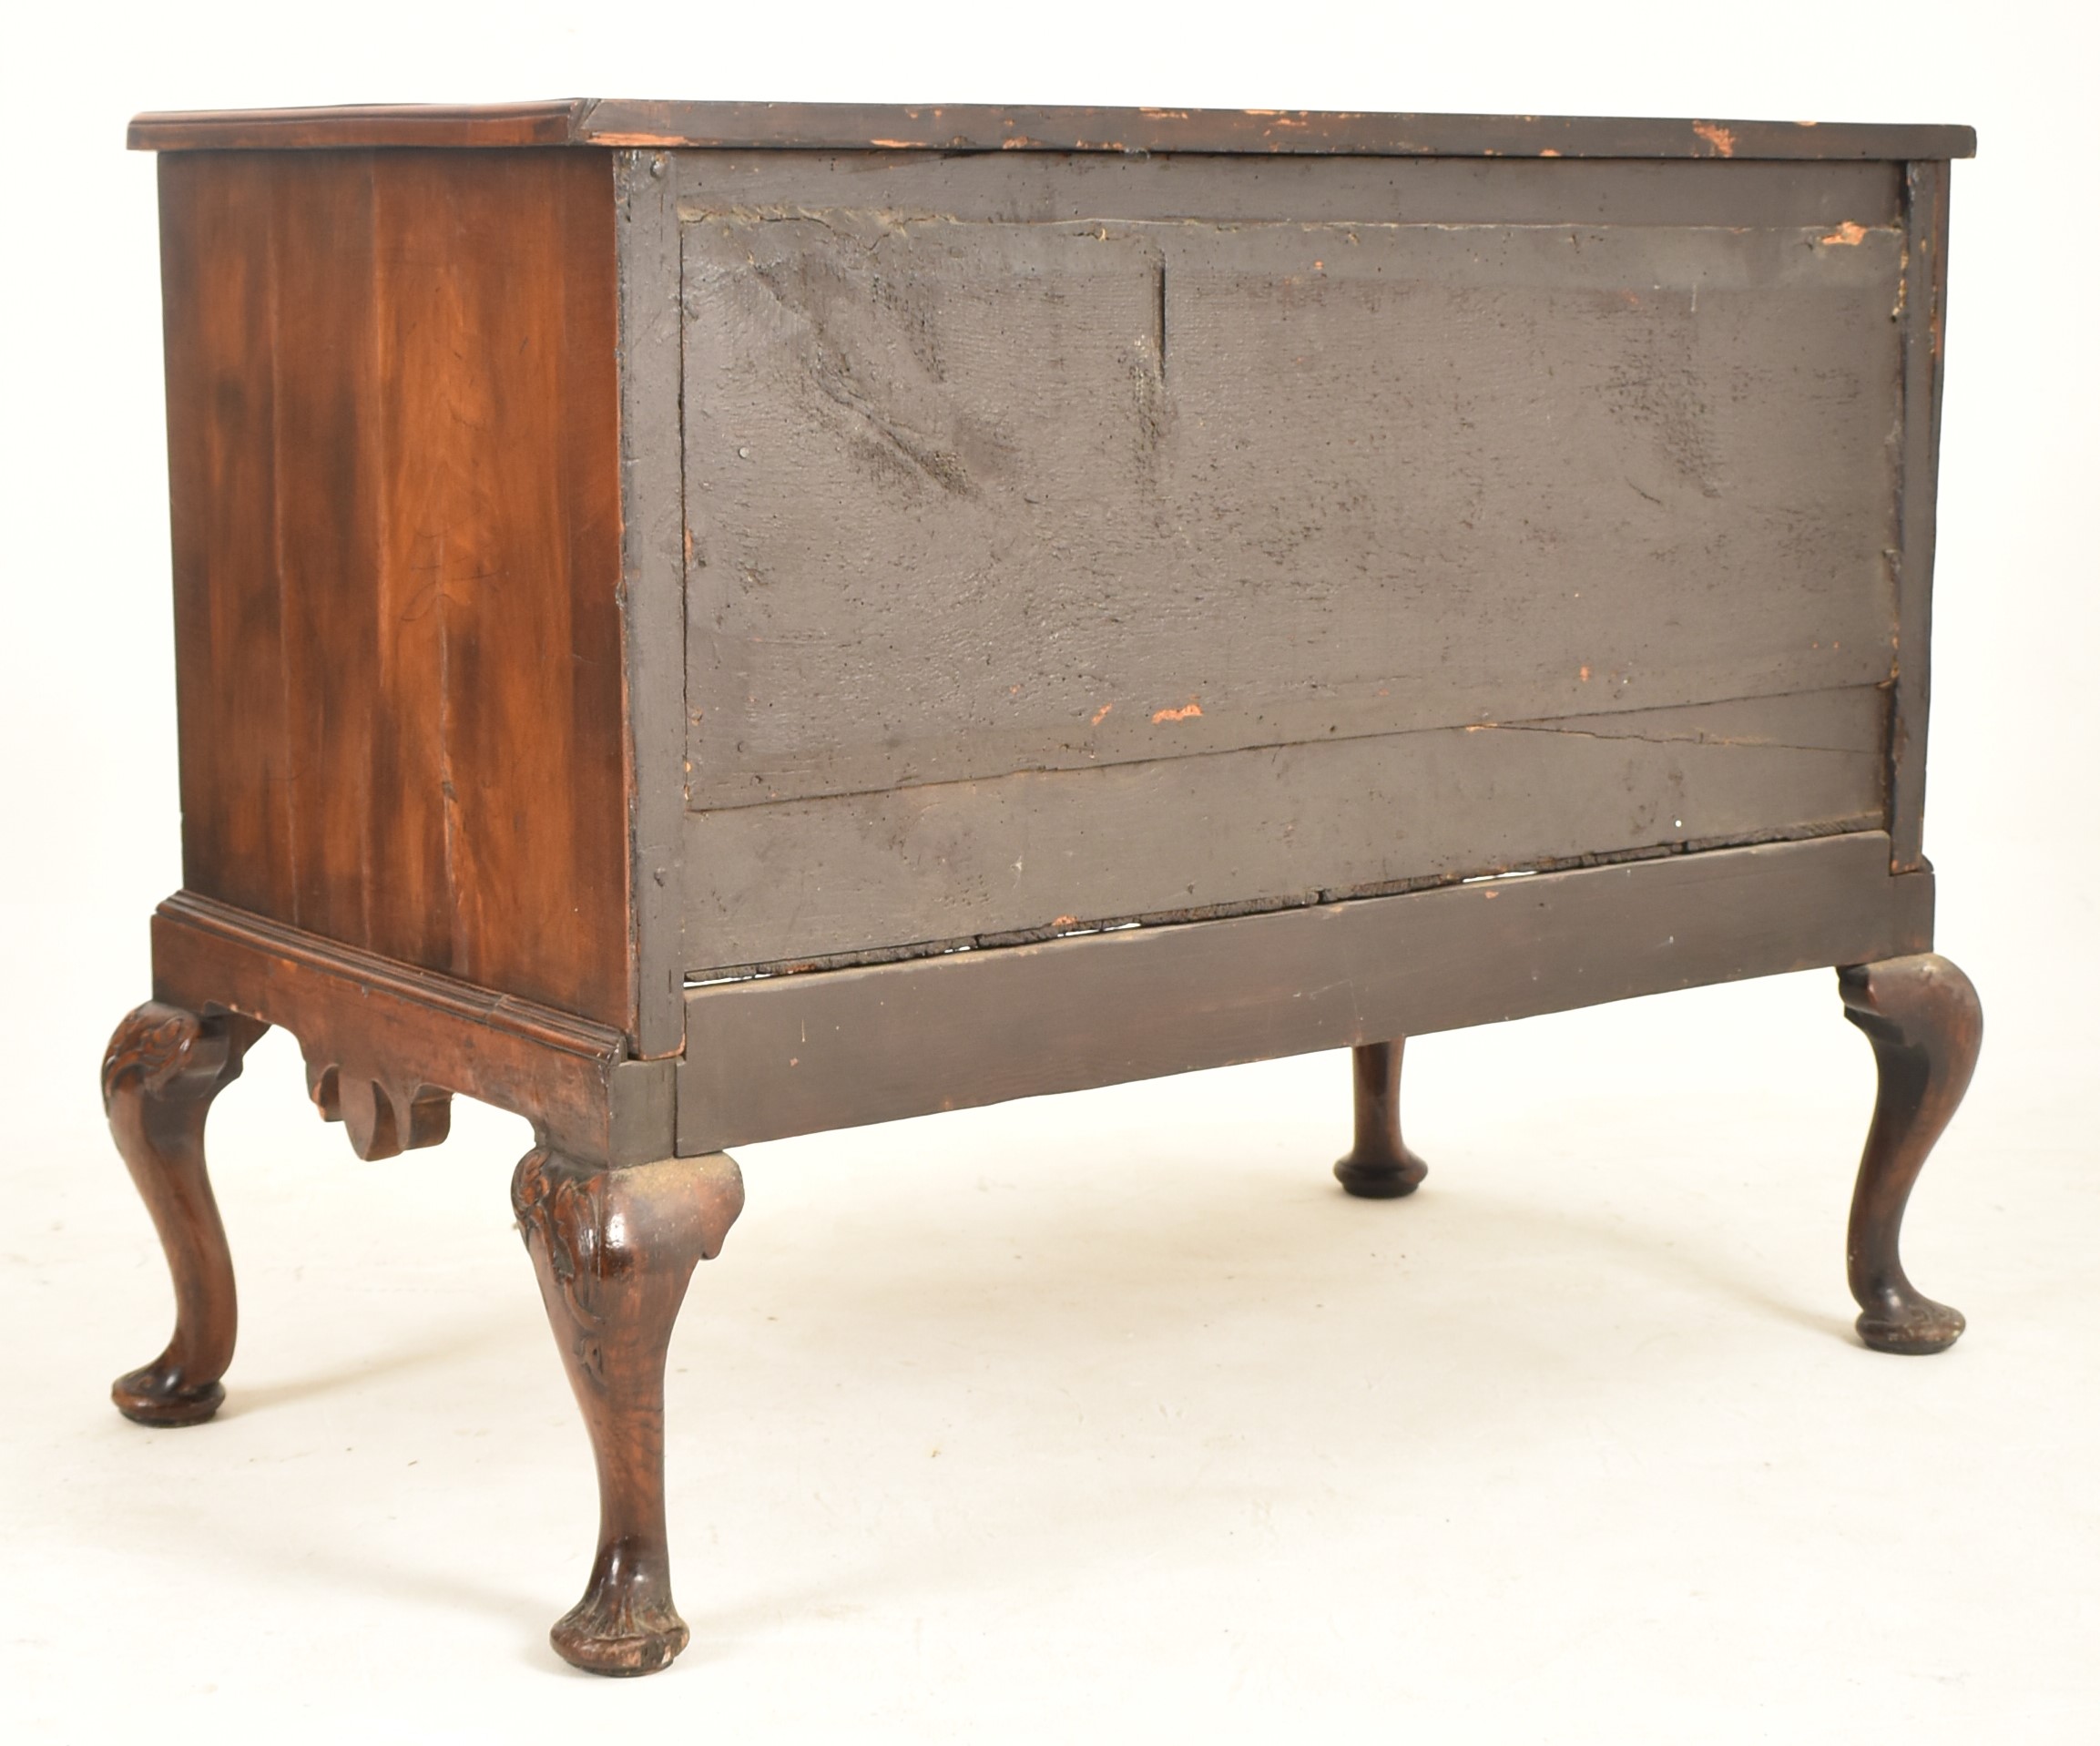 QUEEN ANNE 18TH CENTURY WALNUT & BOXWOOD CHEST ON STAND - Image 5 of 5